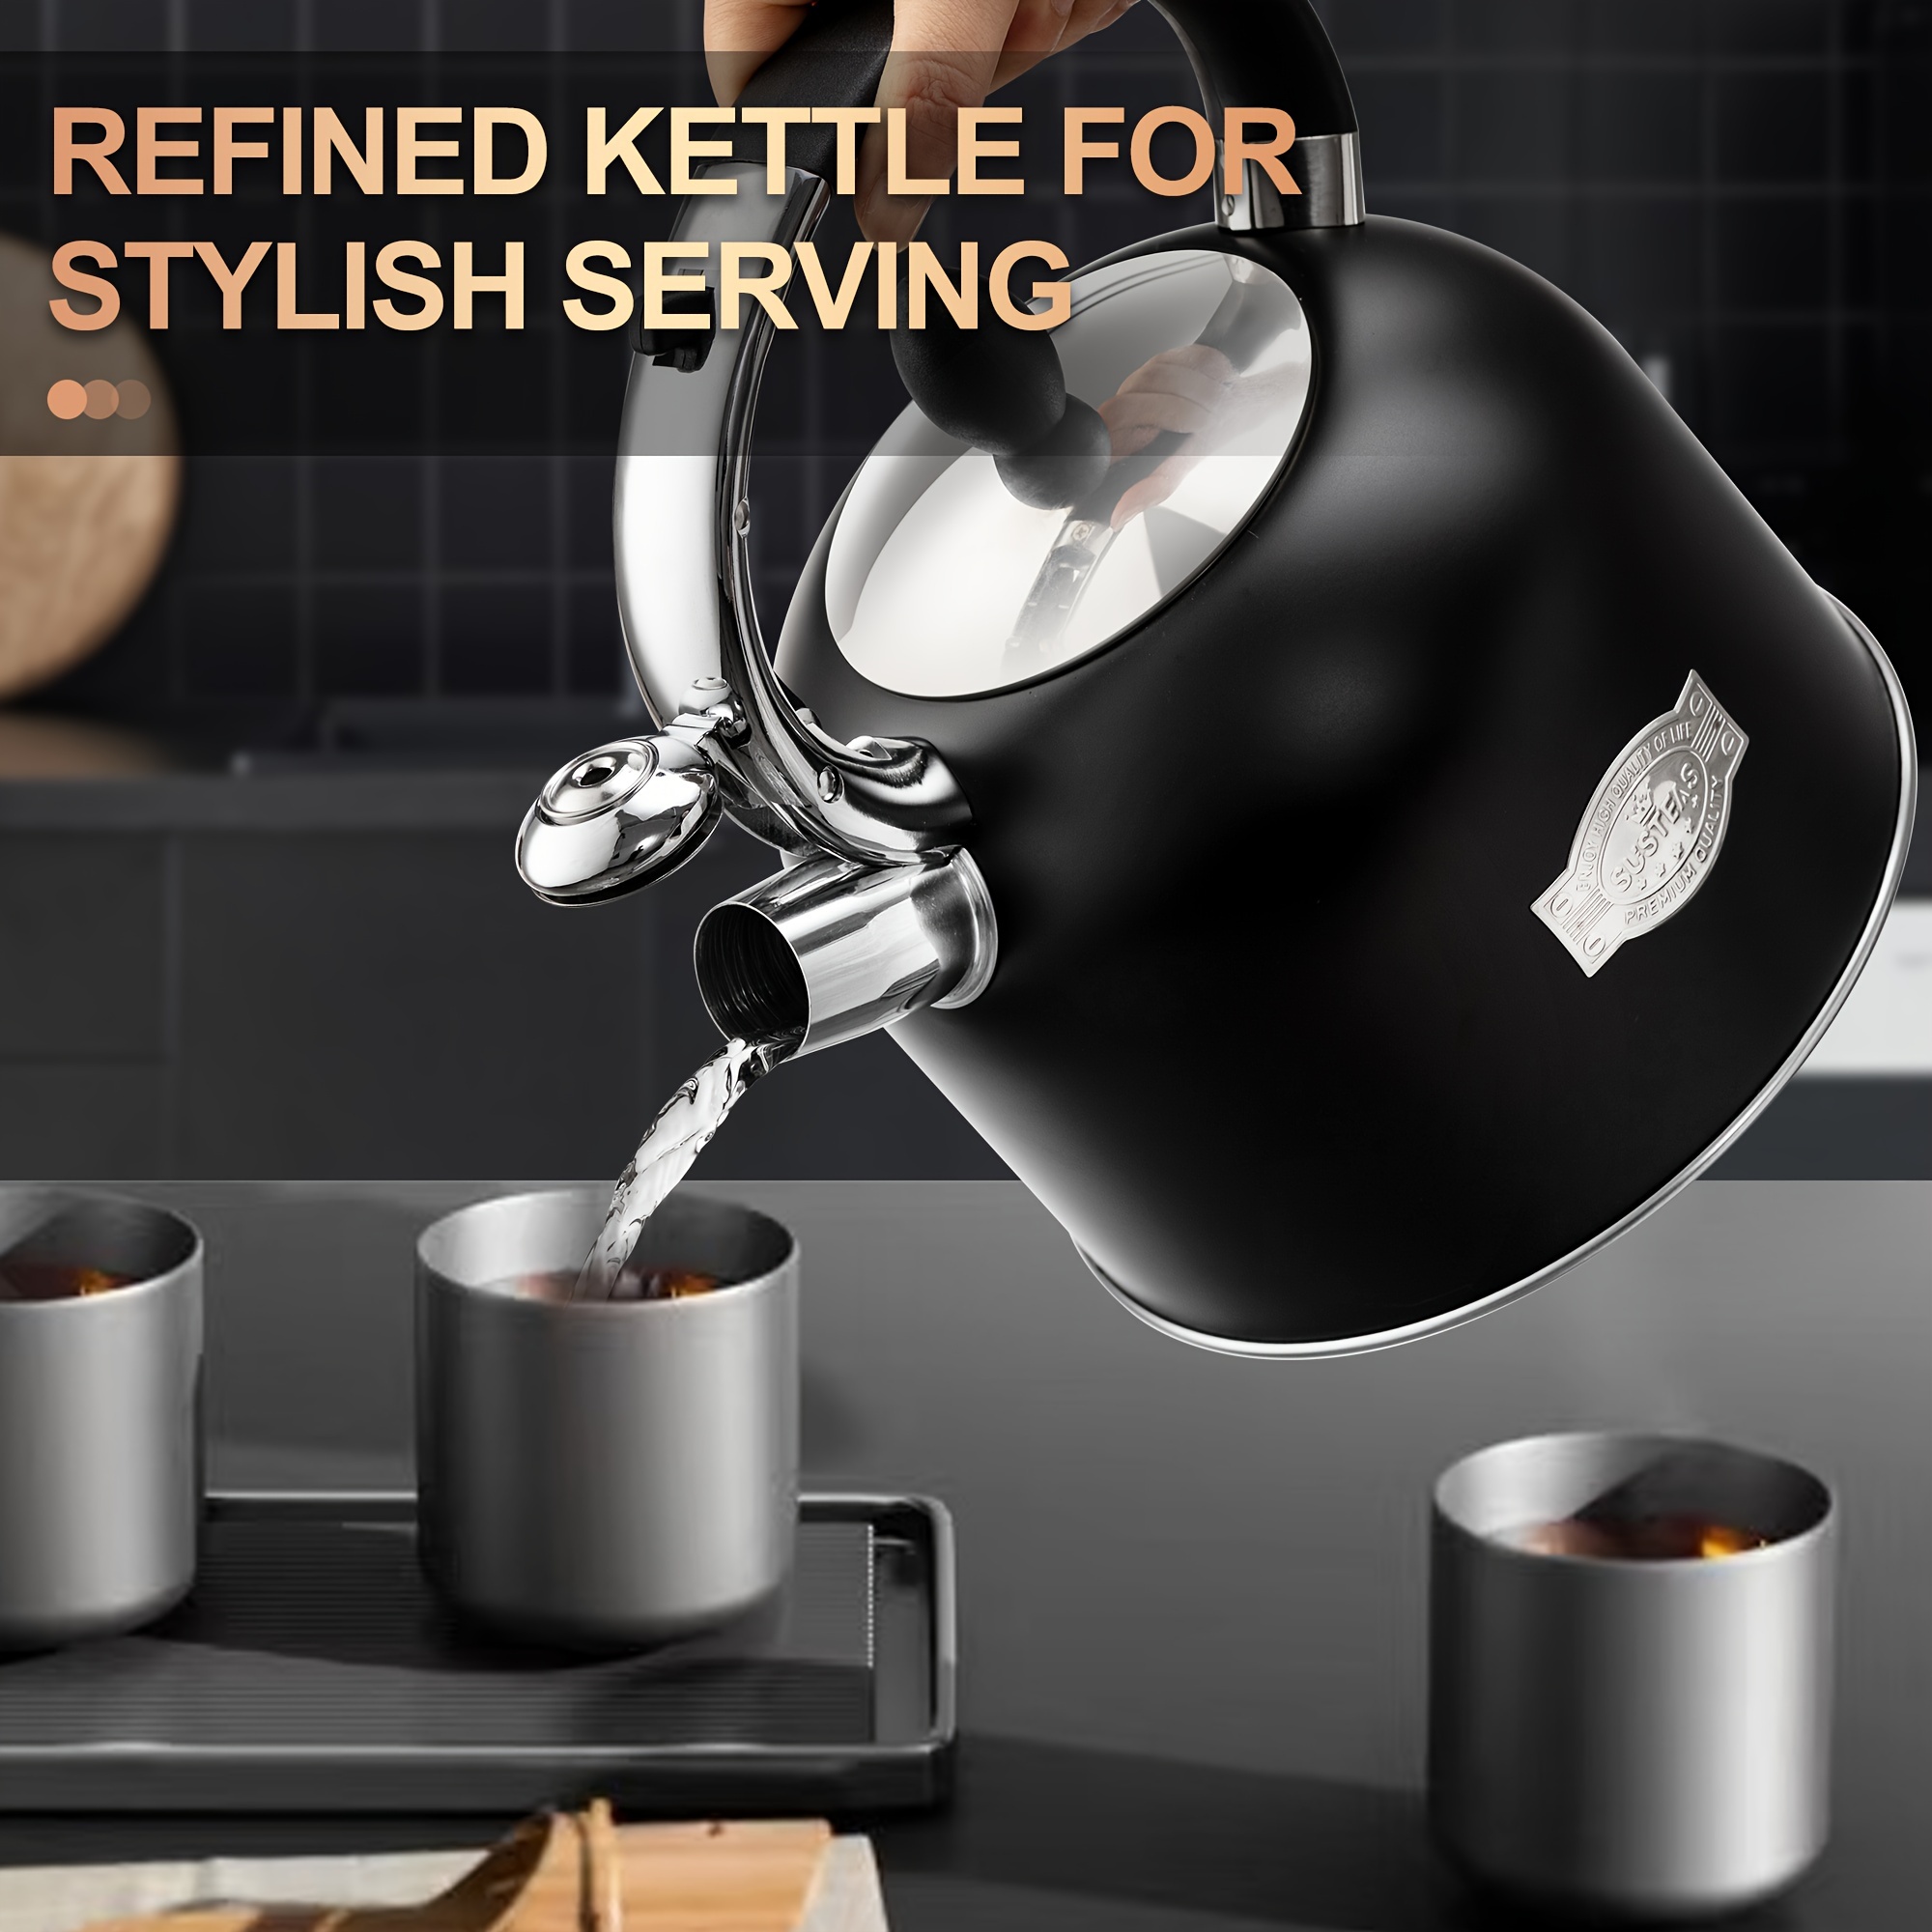 

Susteas Tea Kettle - 3.17qt Whistling Kettle With Ergonomic Handle - Premium Stainless Steel Tea Pots For Stove Top, Chic Vintage Teapot With Composite Base, Work For All Stovetops (black)